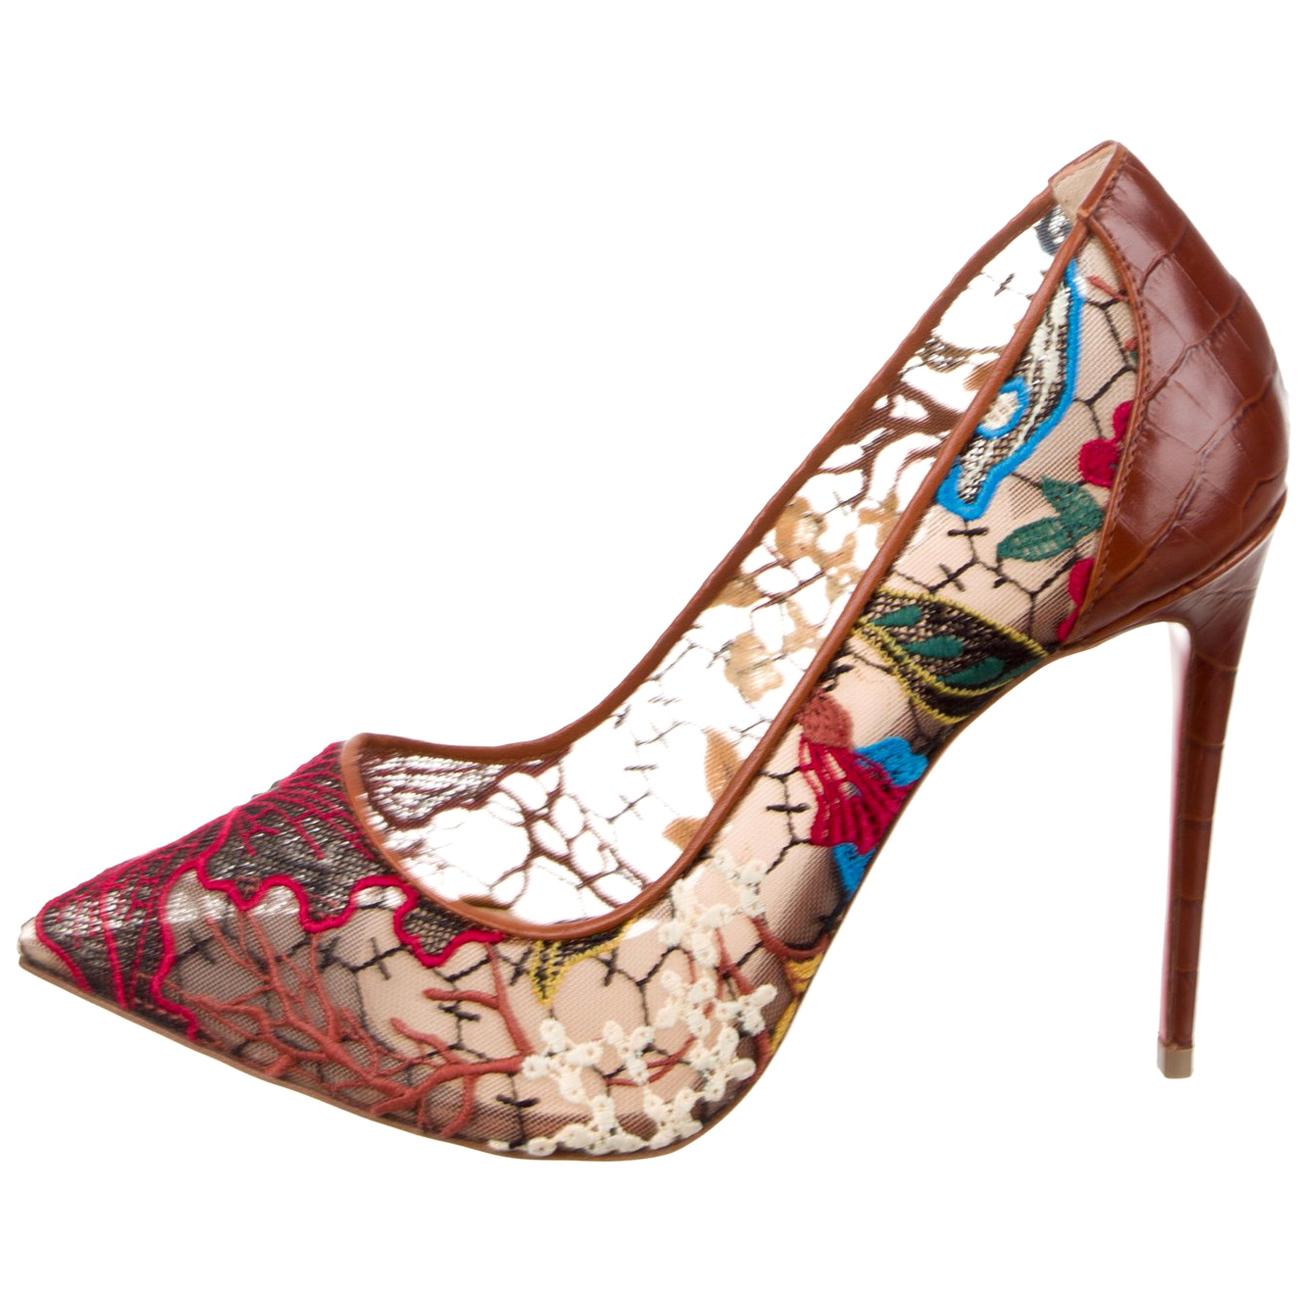 Christian Louboutin NEW Brown Leather Flower Mesh Evening Pumps Heels 